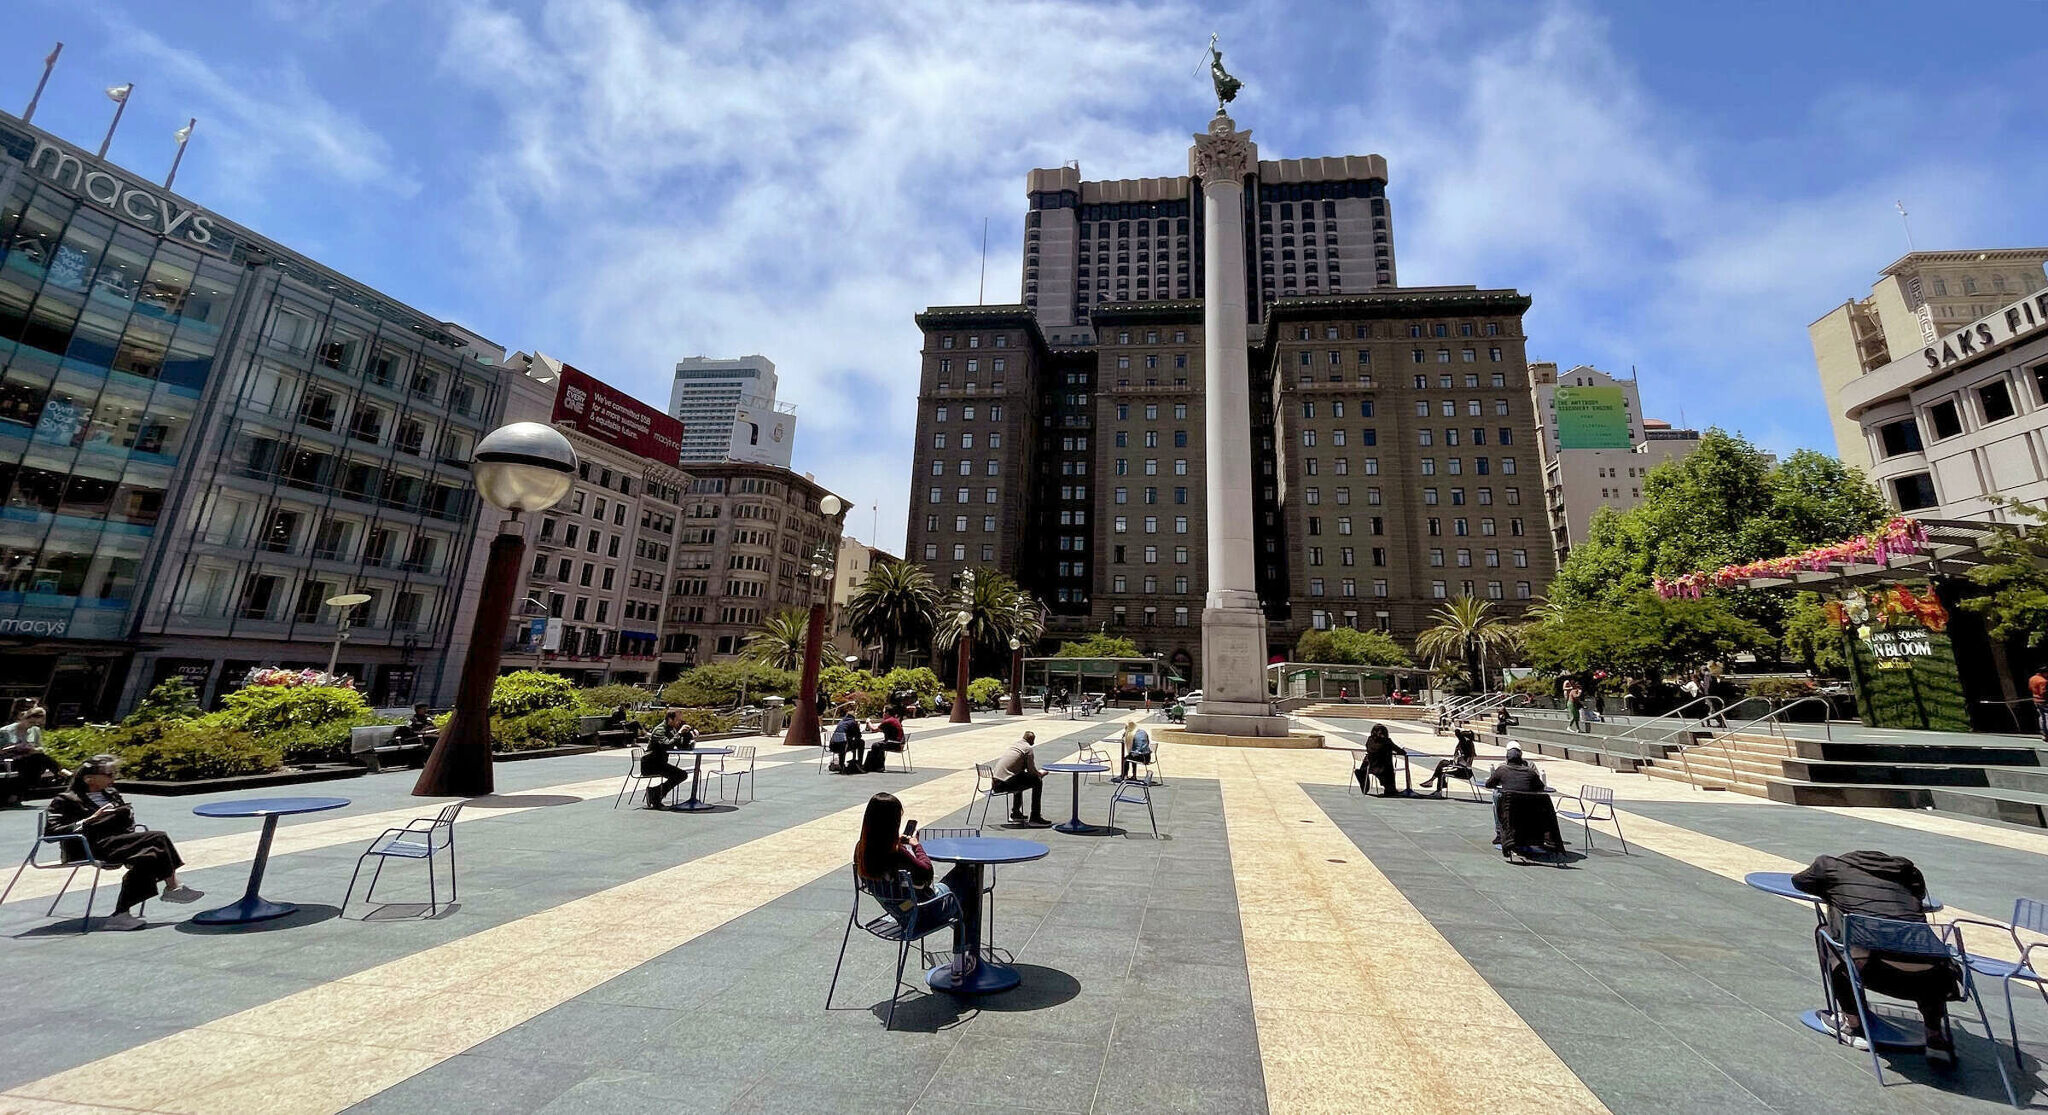 Union Square in San Francisco - San Francisco's Biggest Shopping